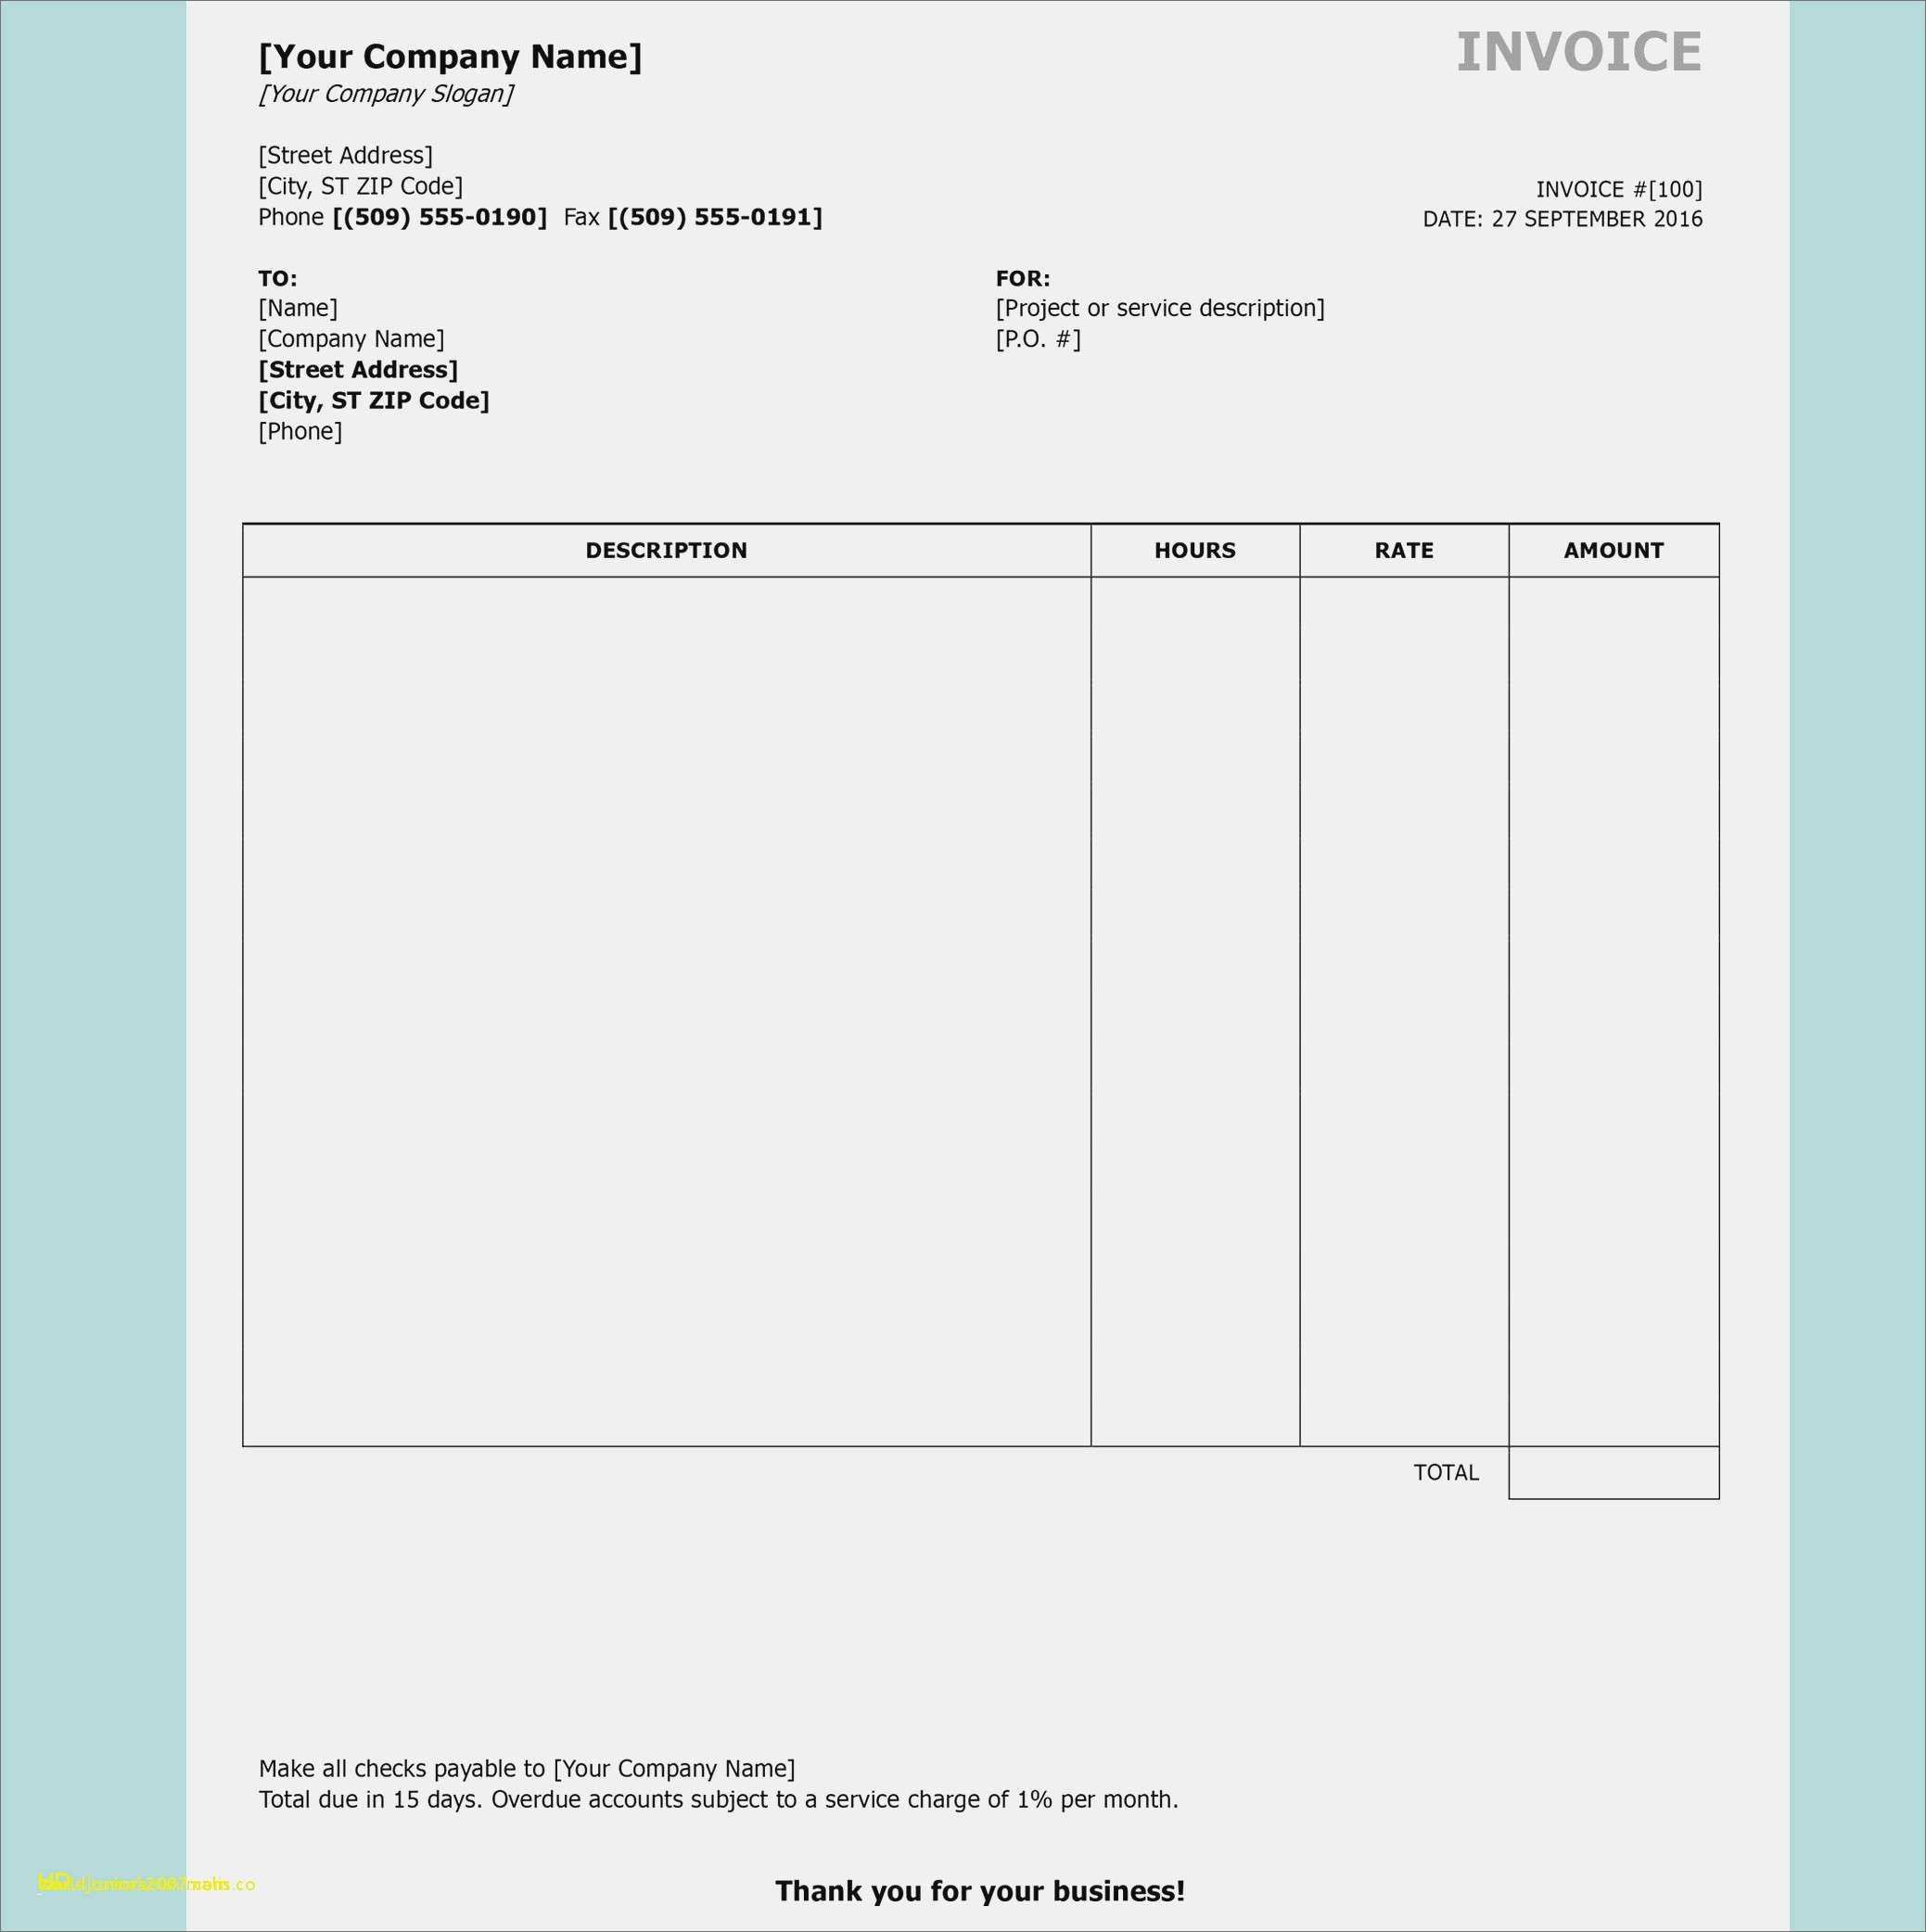 tax-invoice-statement-template-cards-design-templates